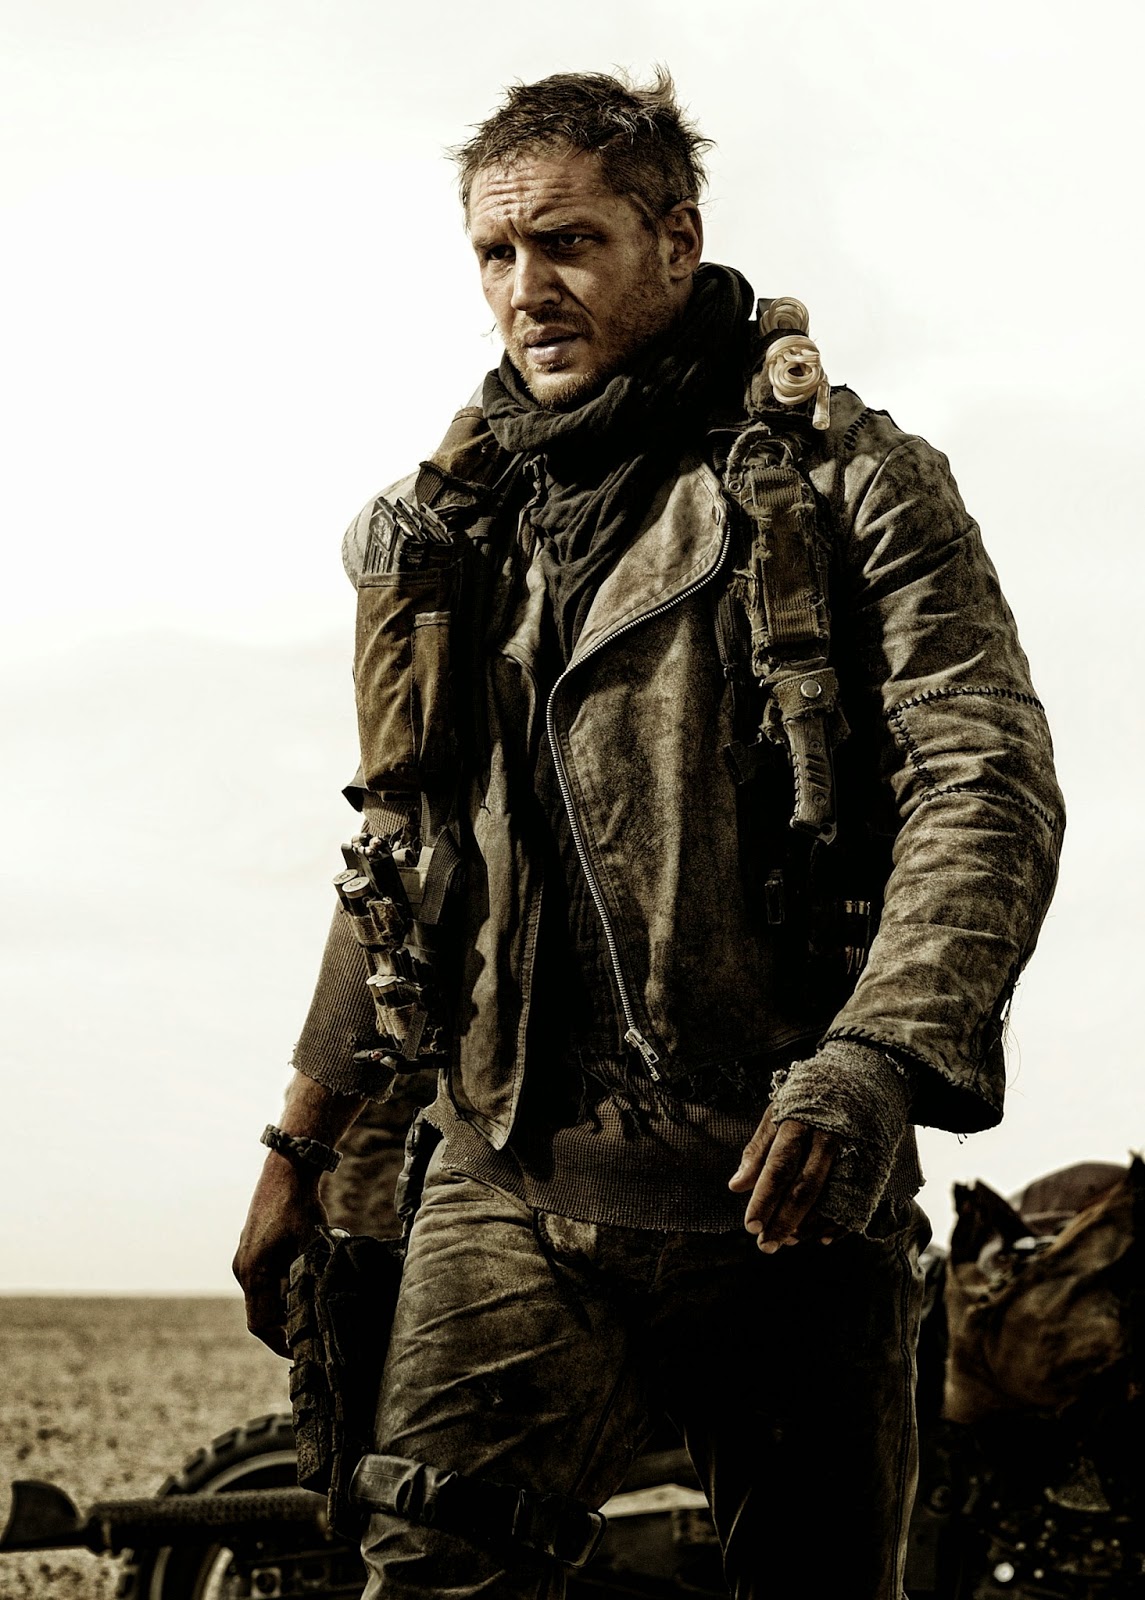 41 New Mad Max Fury Road Pictures The Entertainment Factor 